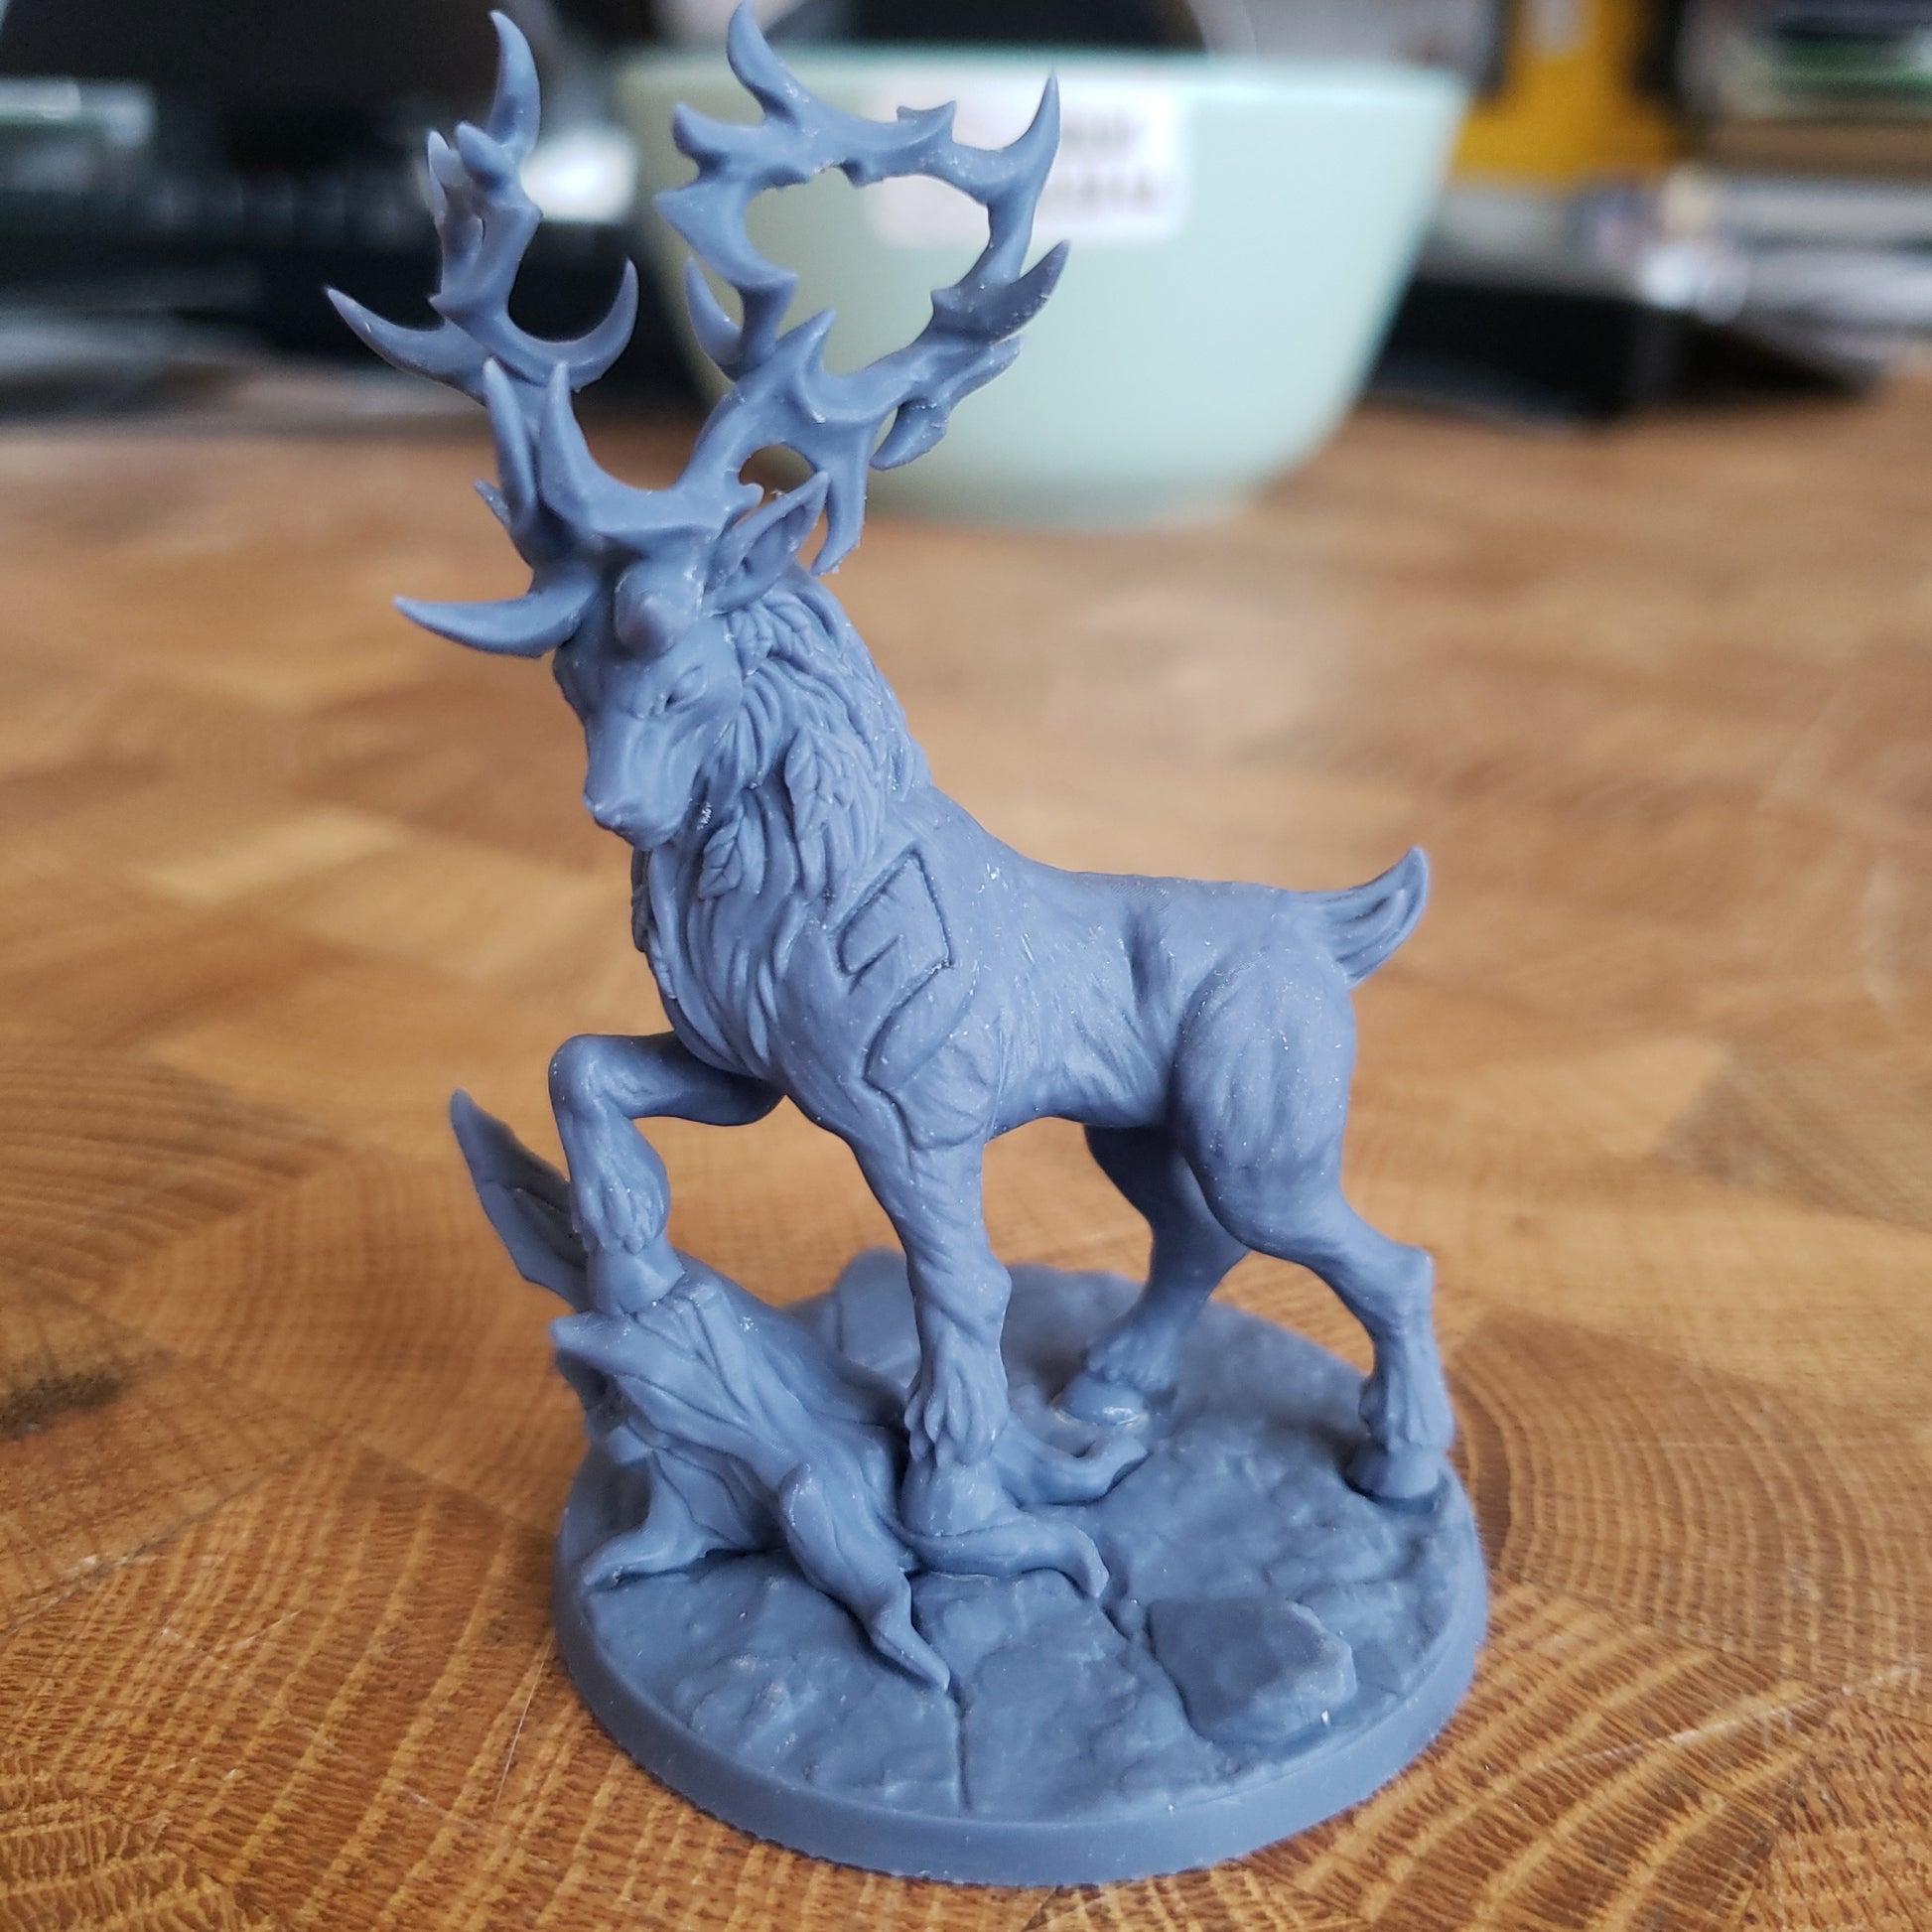 Image shows an example of a 3D printed wild stag gaming miniature printed in-house at All Systems Go